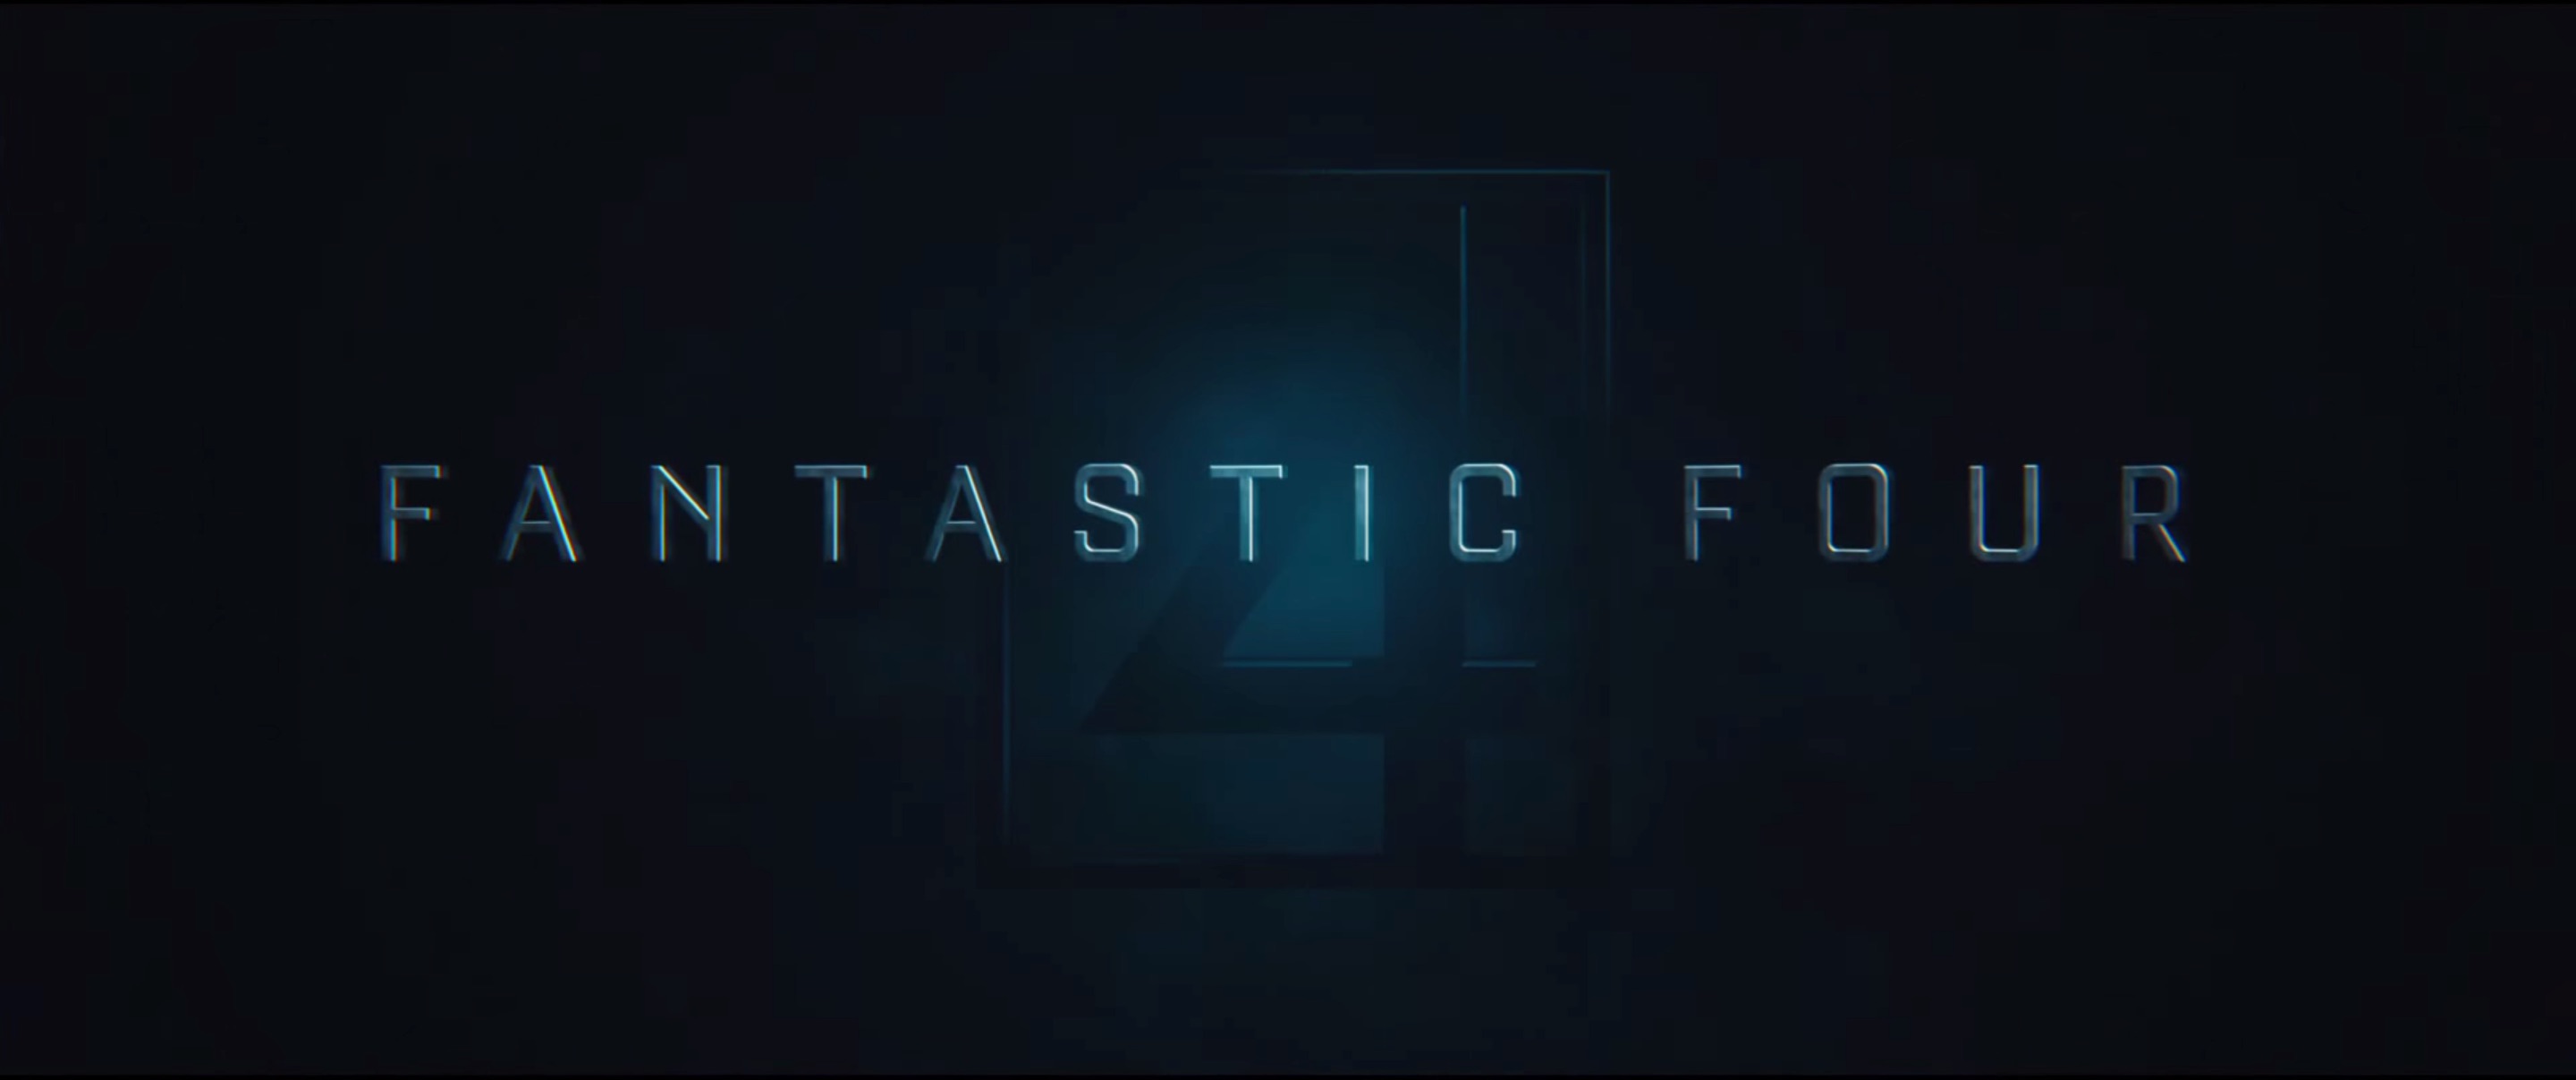 Fantastic Four Movie HD Wallpapers